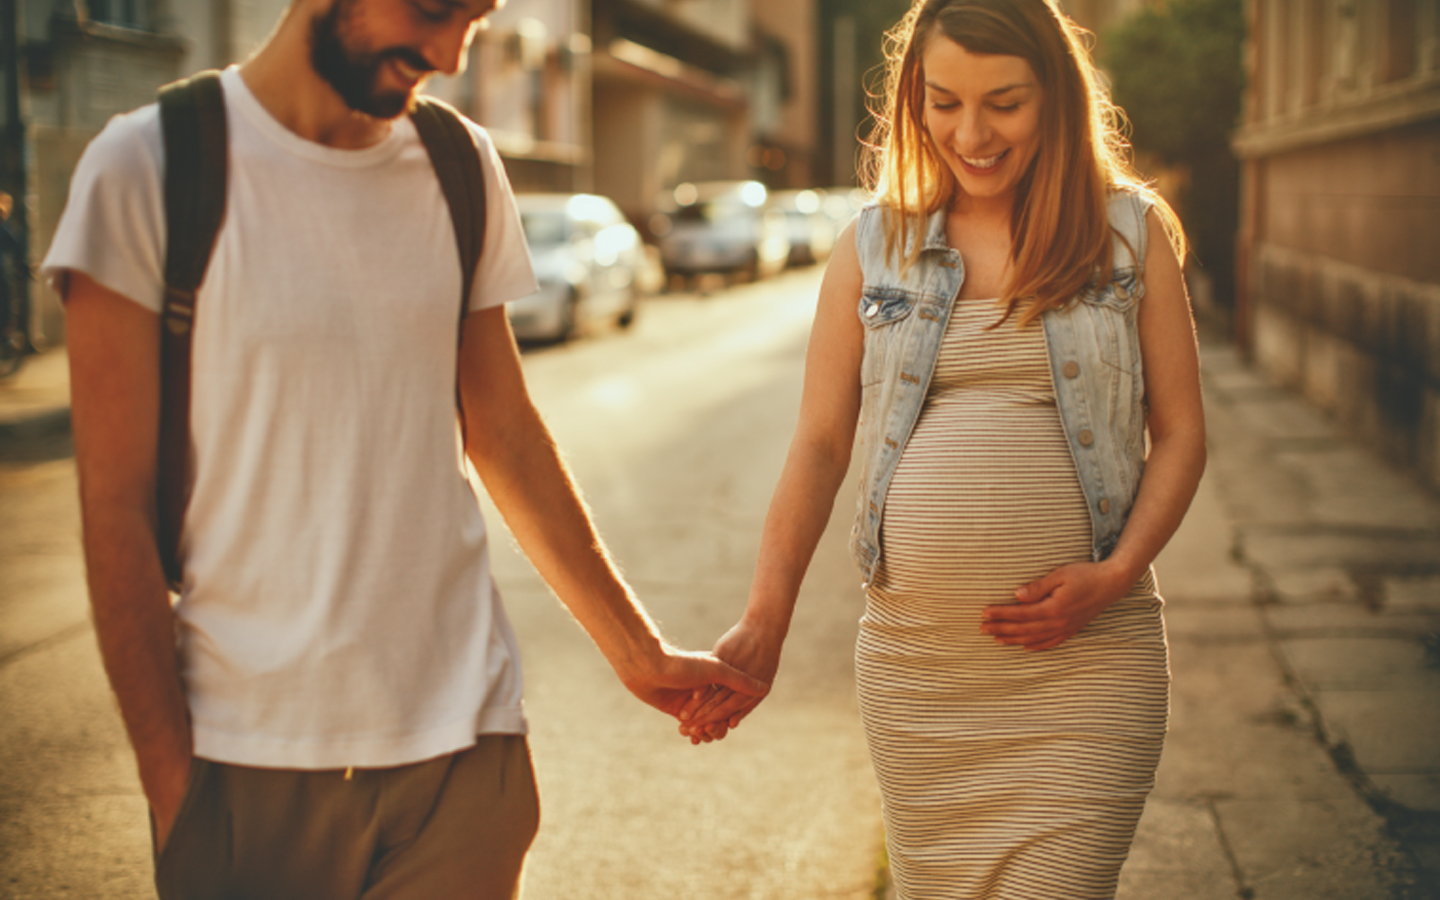 Man holding hands with pregnant women